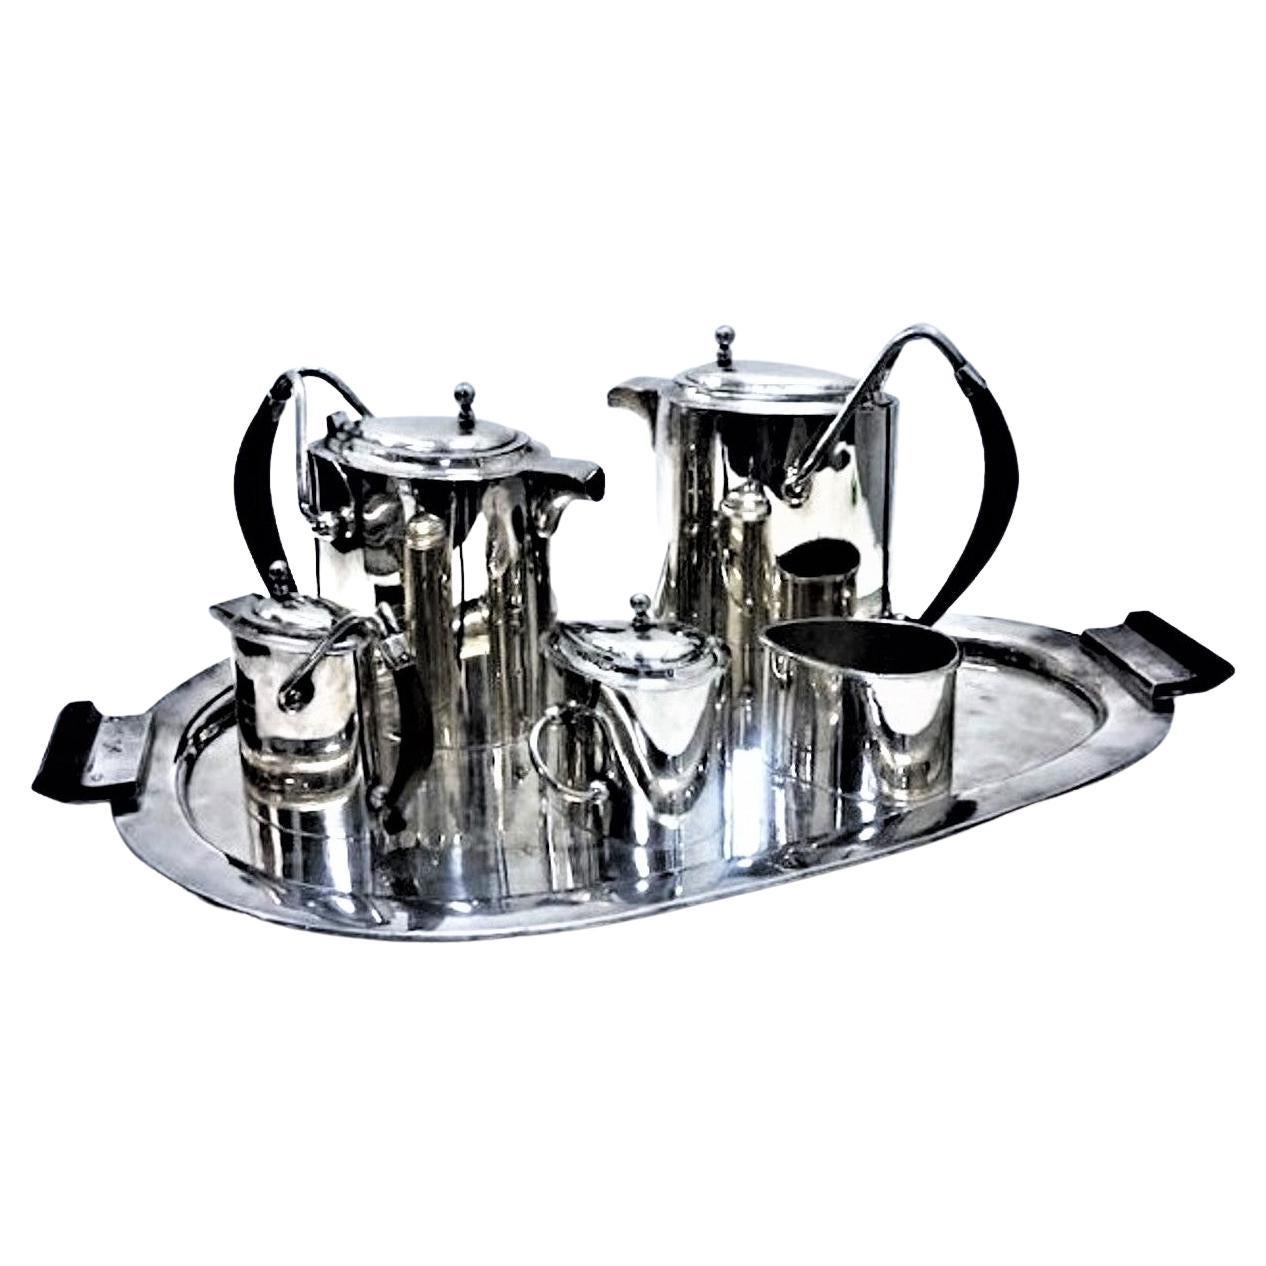 What is the value of a sterling silver tea service?